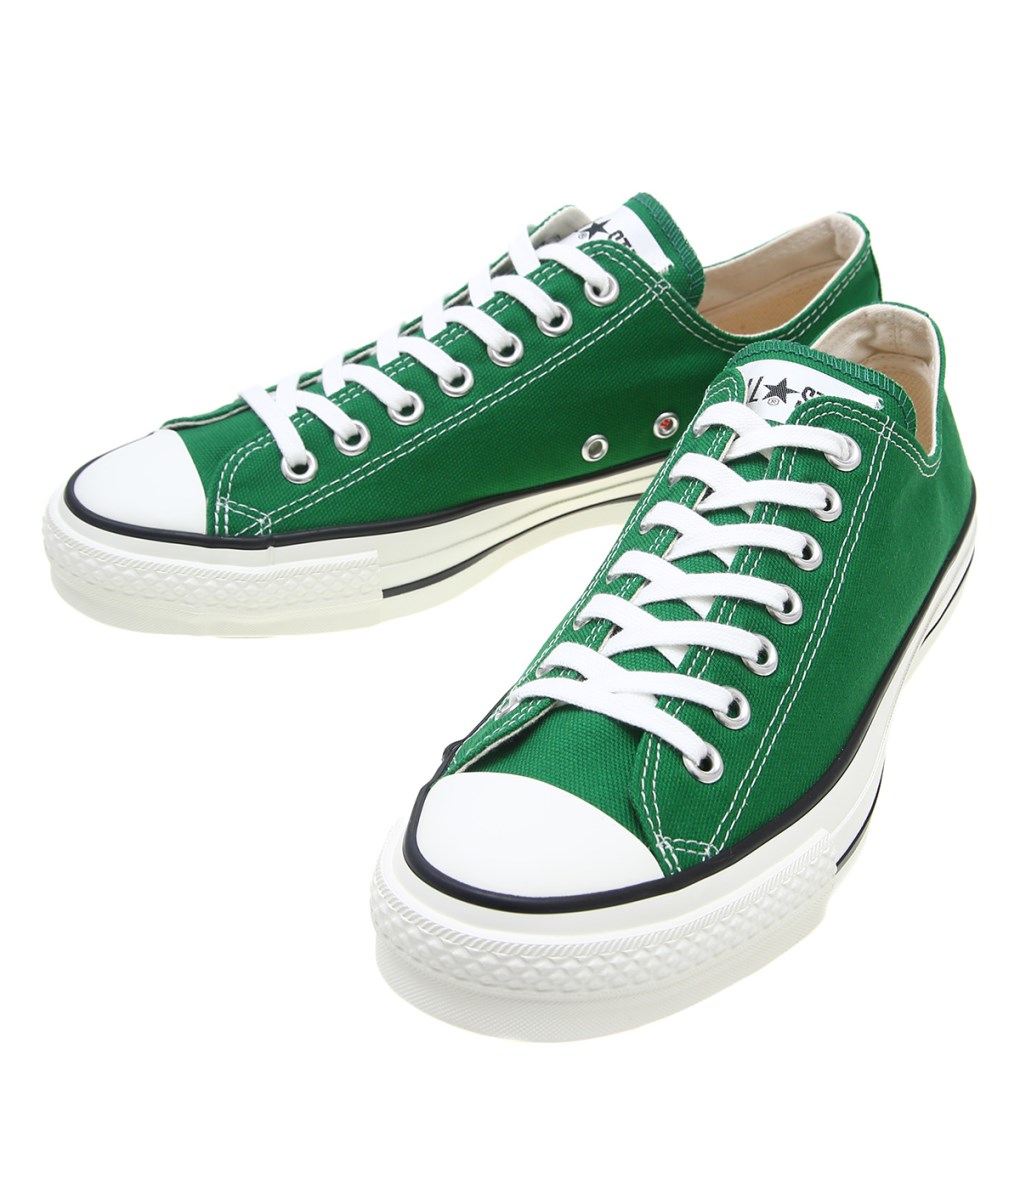 converse all star green shoes